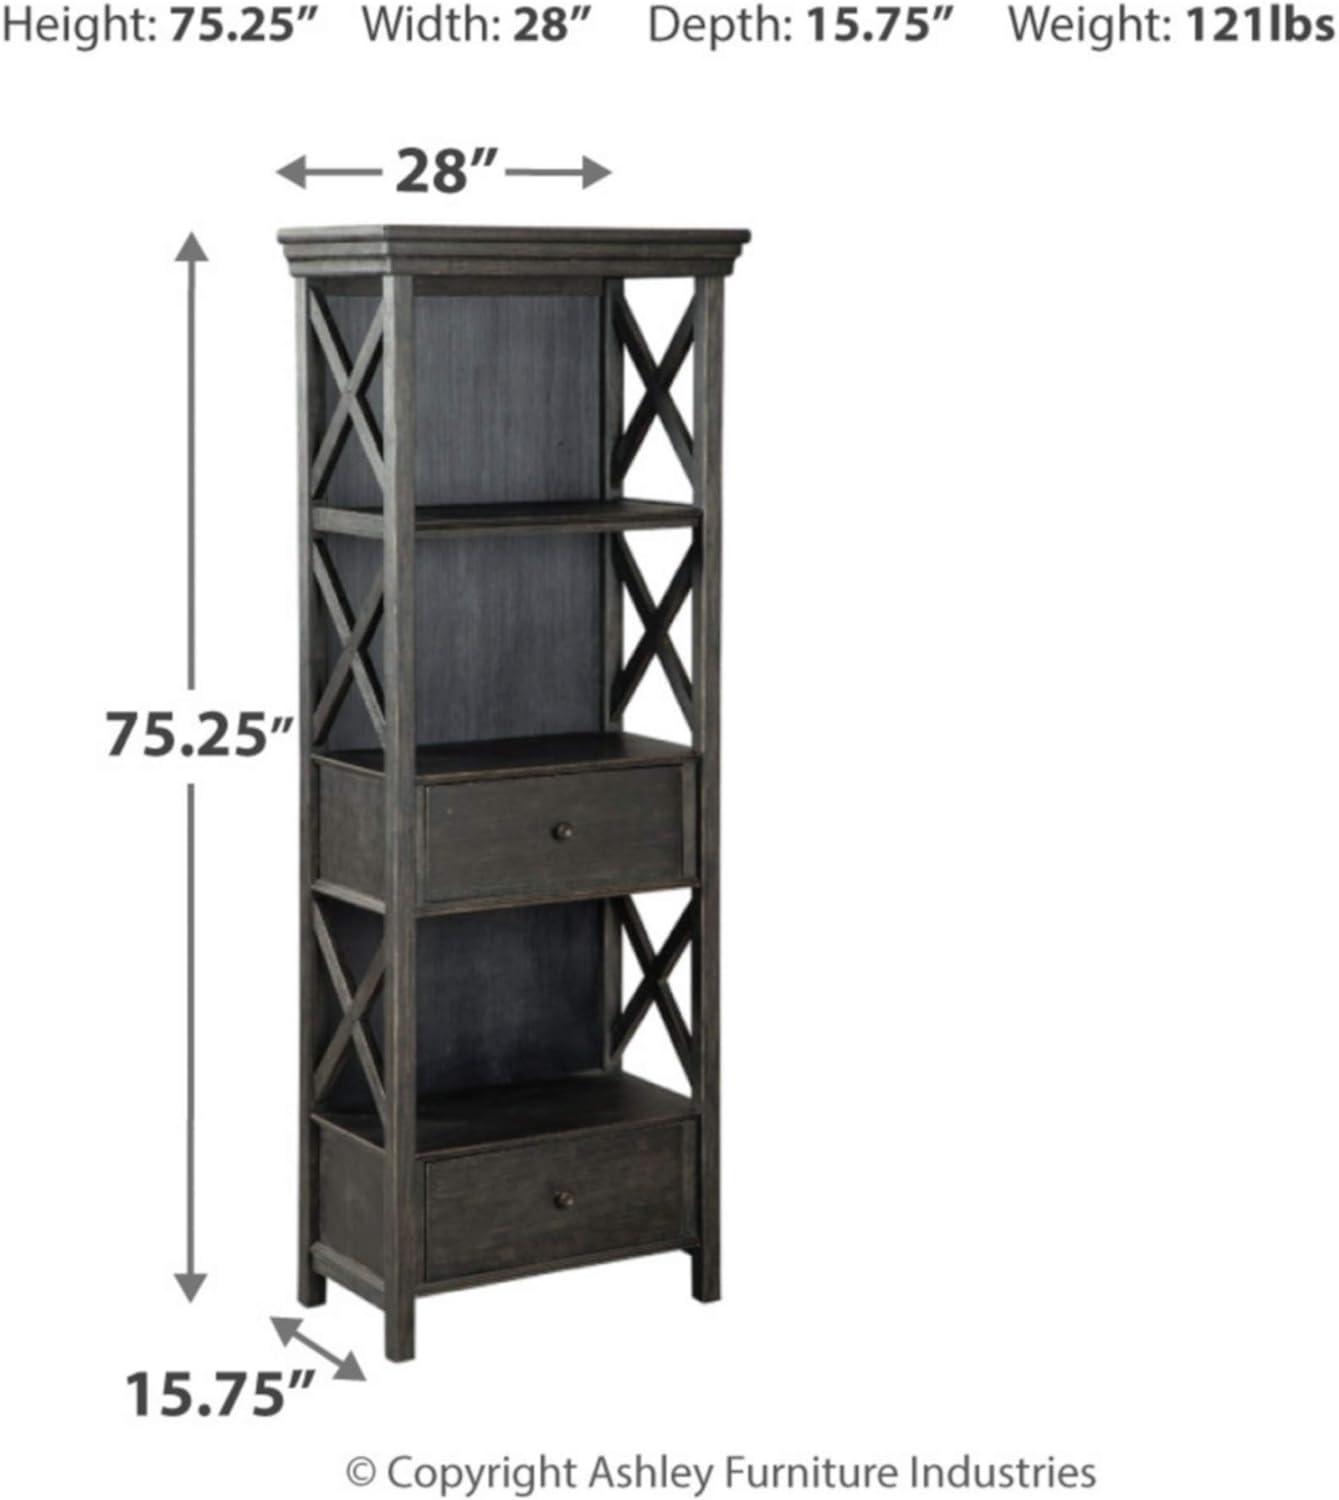 Transitional Black Lighted Display Cabinet with Roomy Drawers